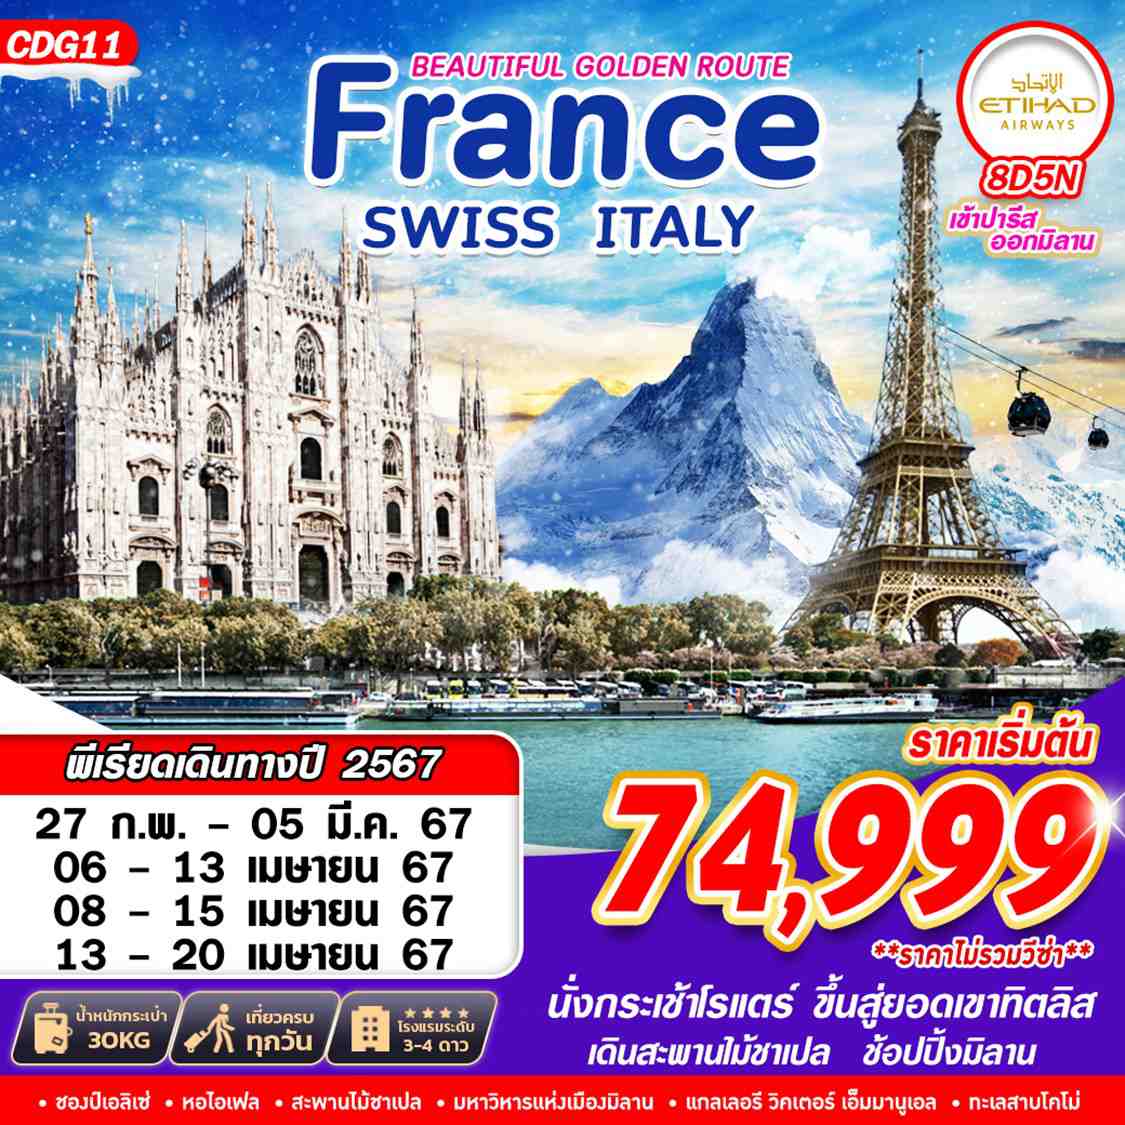 BEAUTIFUL GOLDEN ROUTE FRANCE SWISS ITALY 8 วัน 5 คืน  (EY)